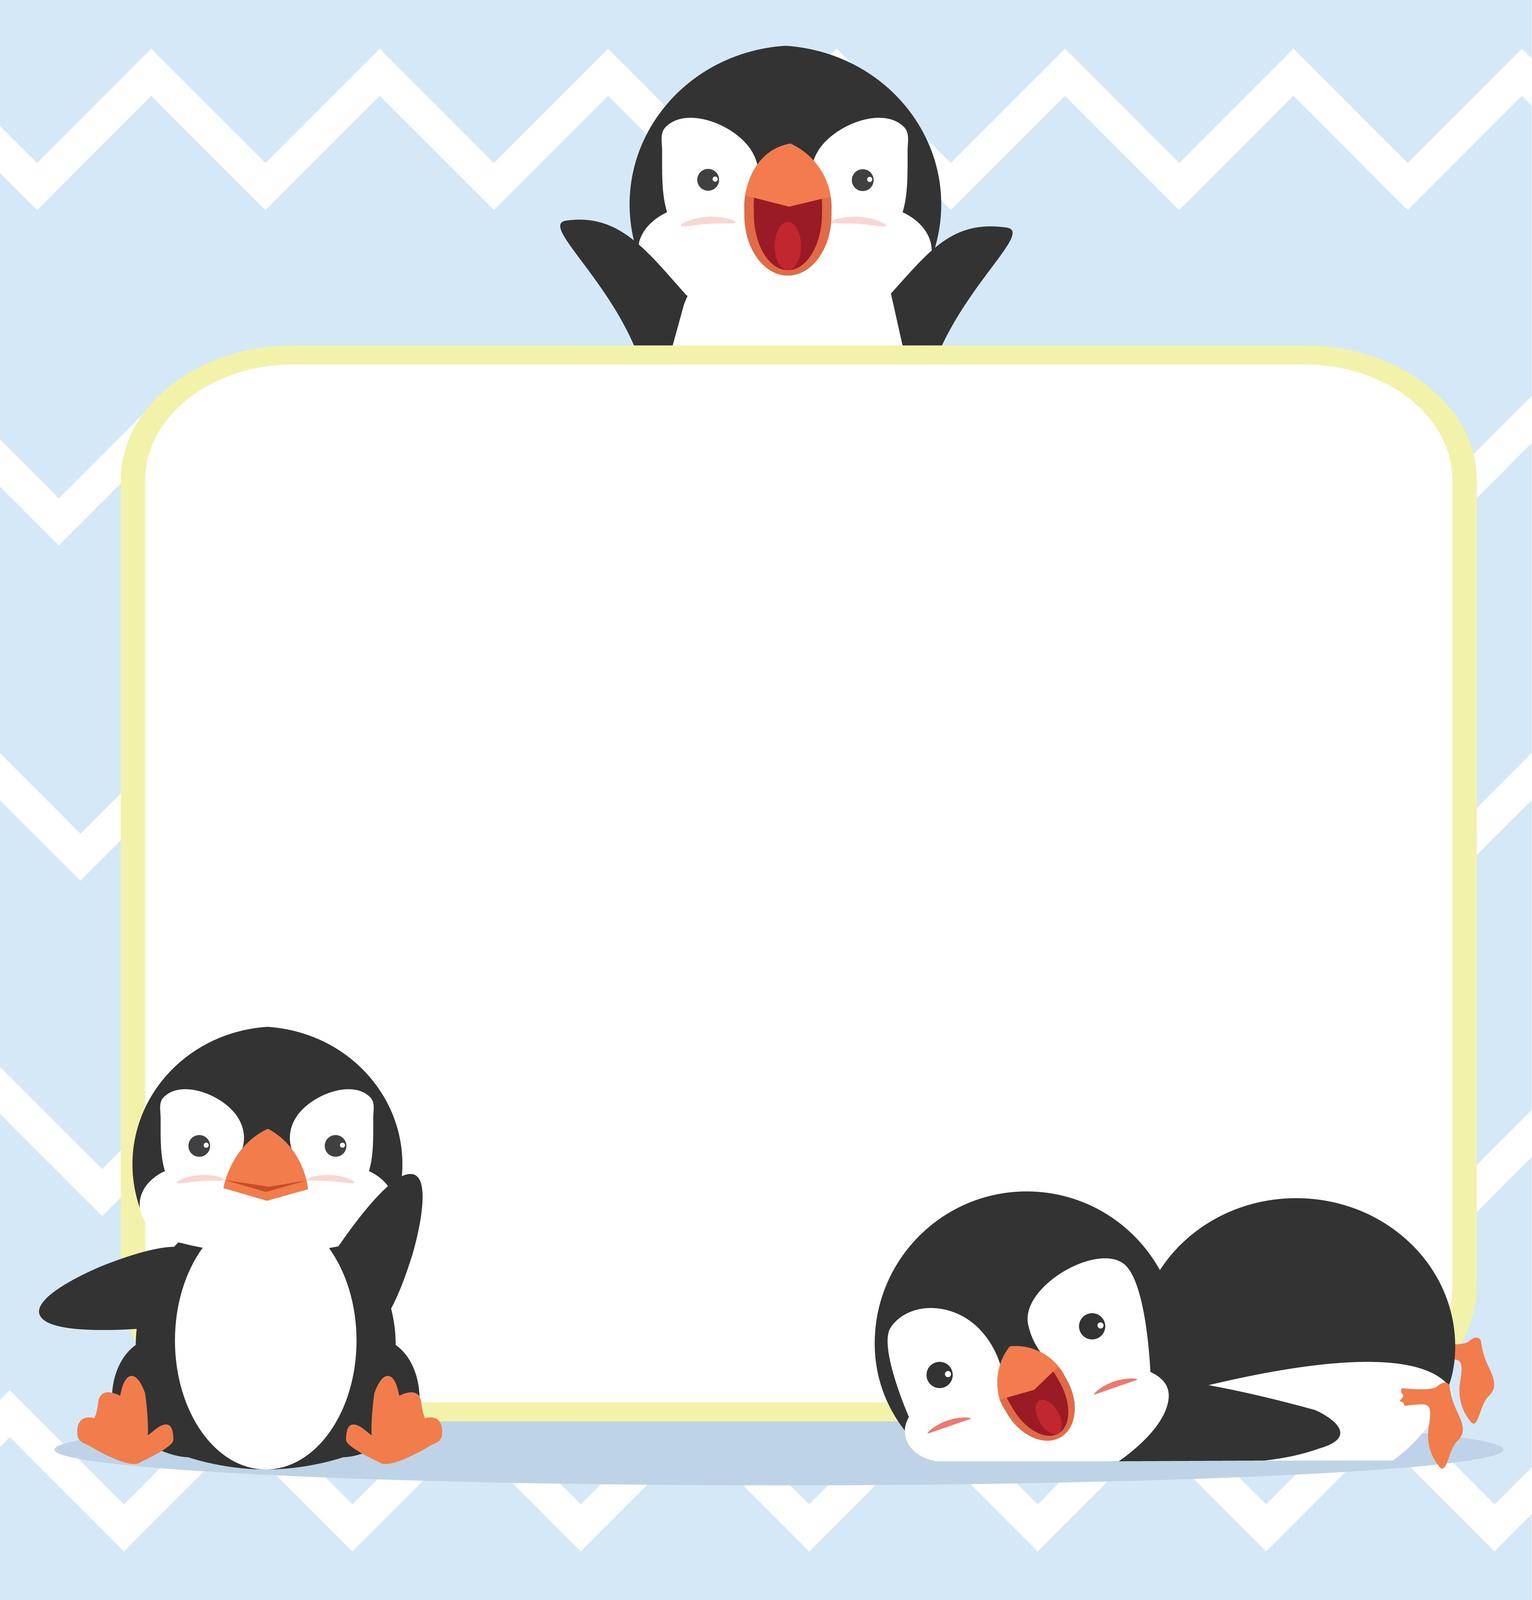 Cute Frame Border with Adorable Penguin  by focus_bell